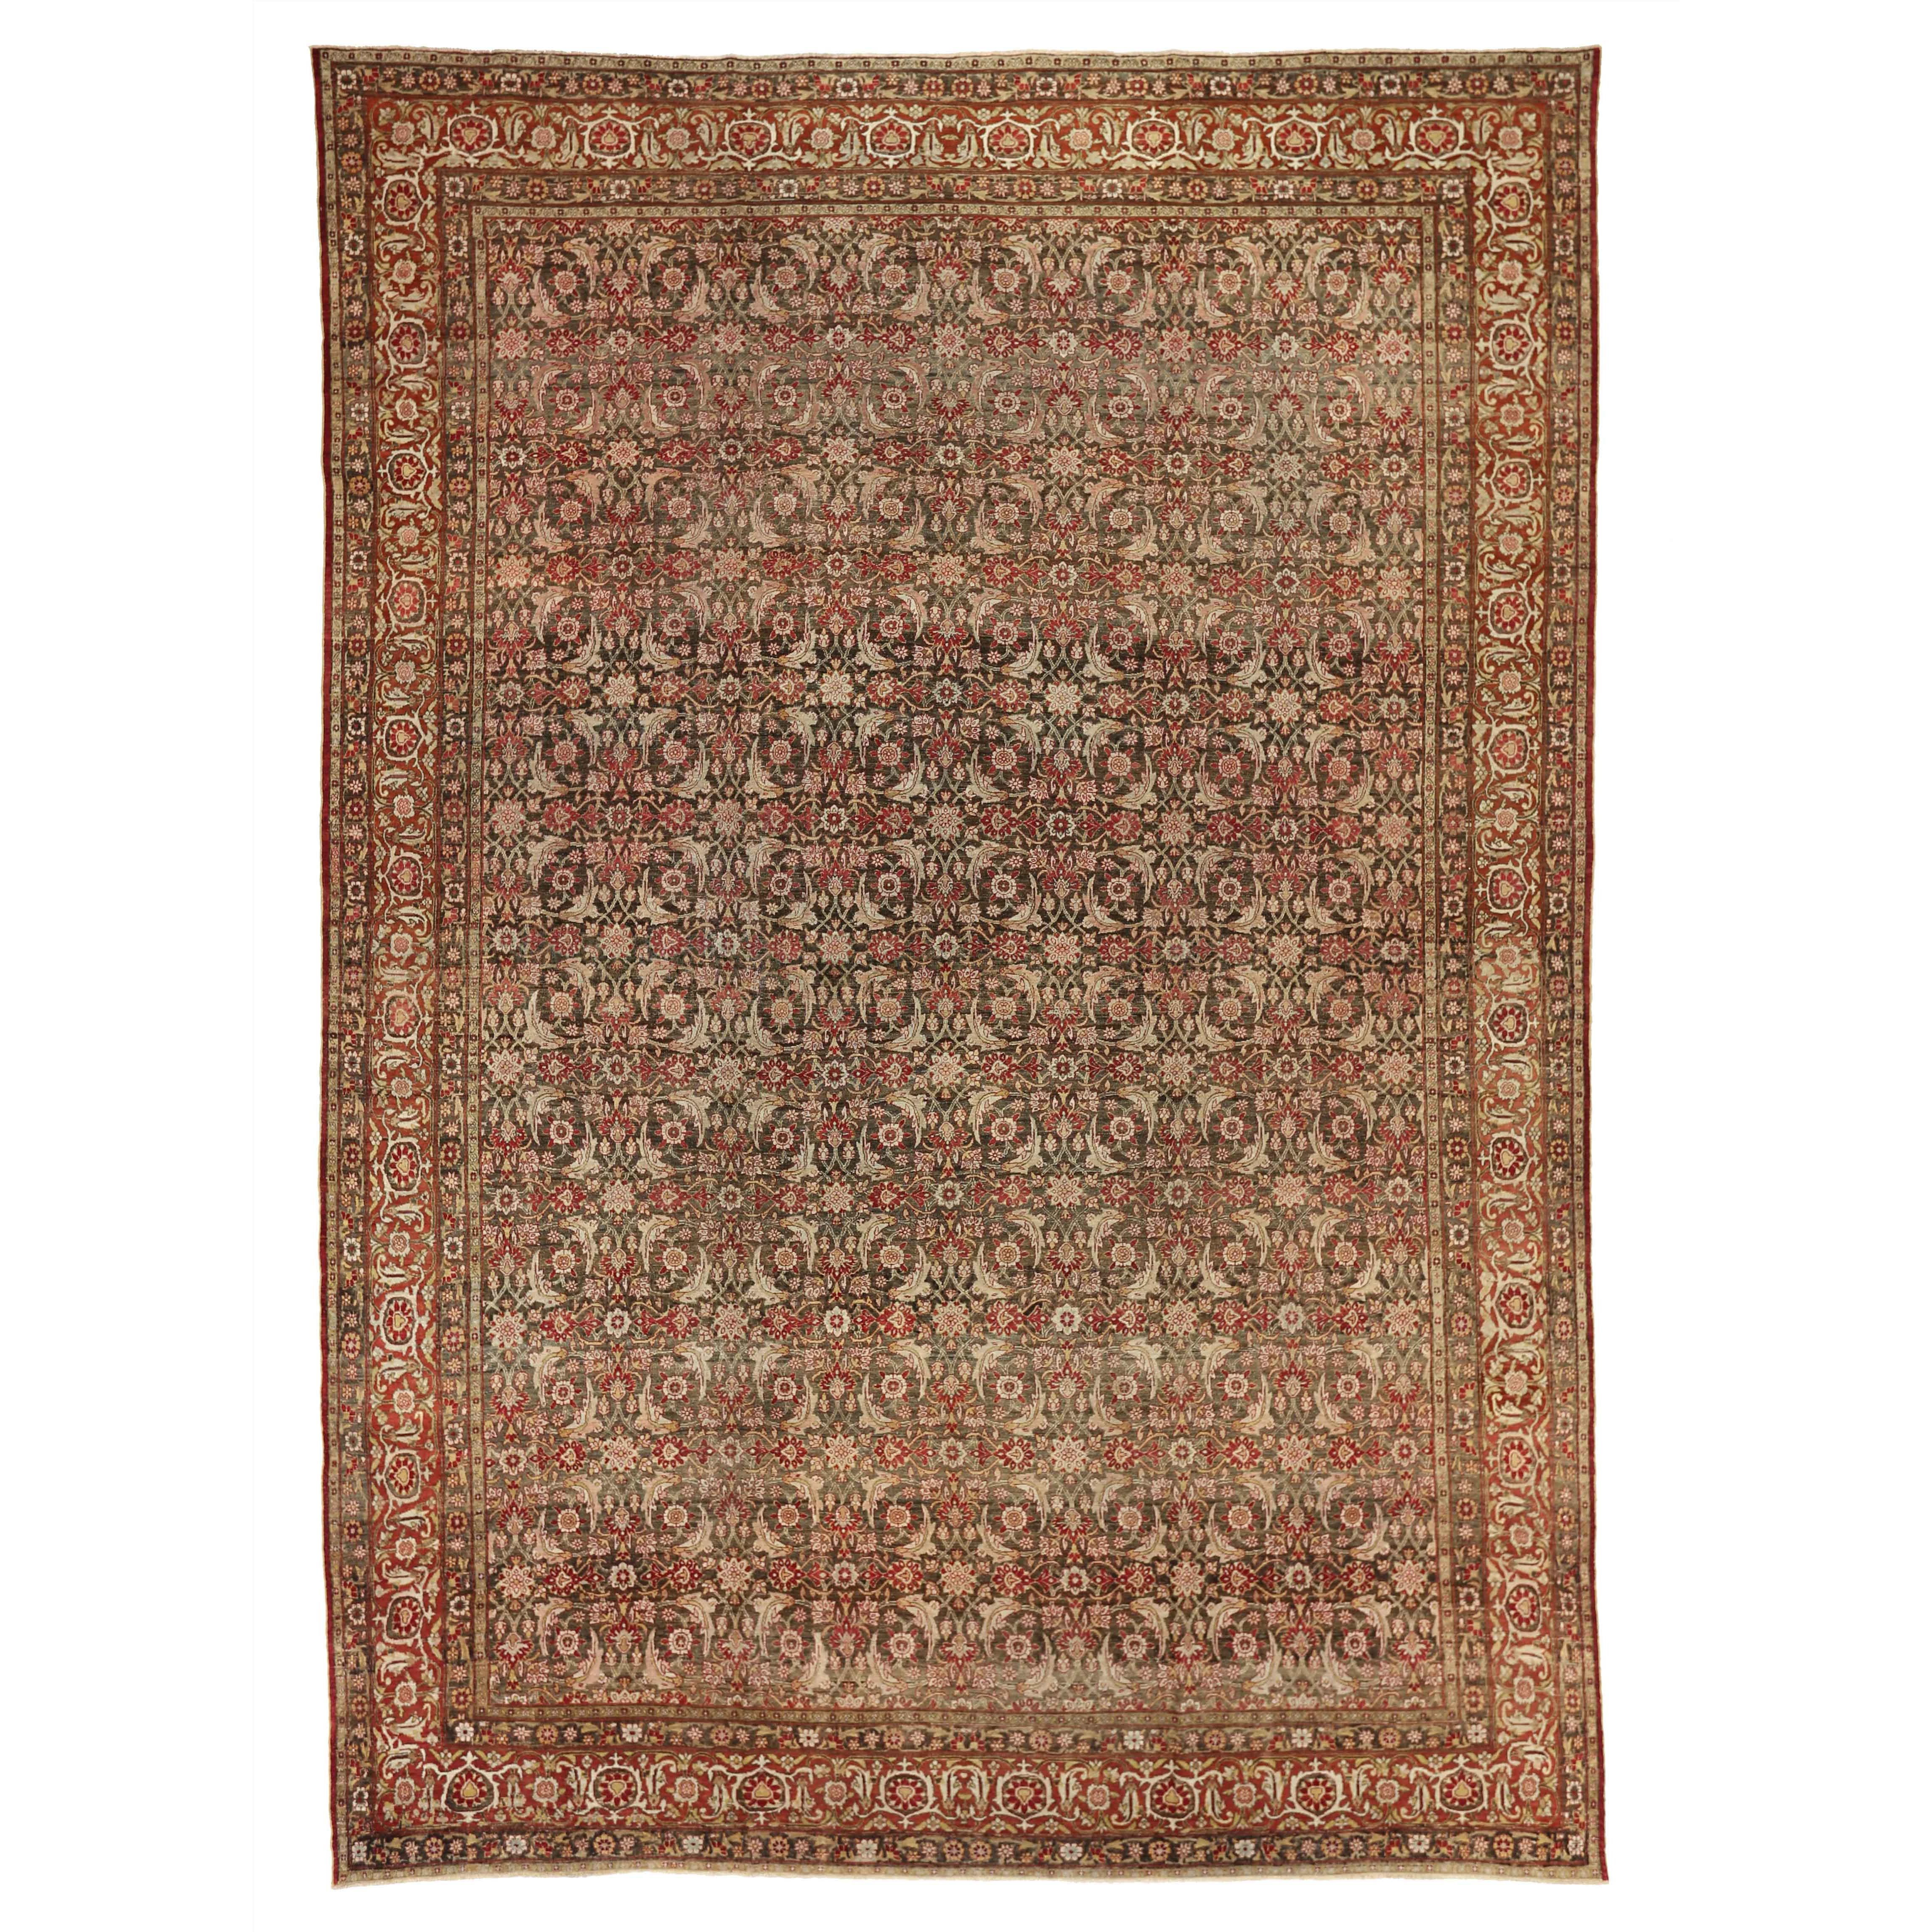  Antique Persian Rug Yazd Design with Red and Pink Medallion Field, circa 1910s